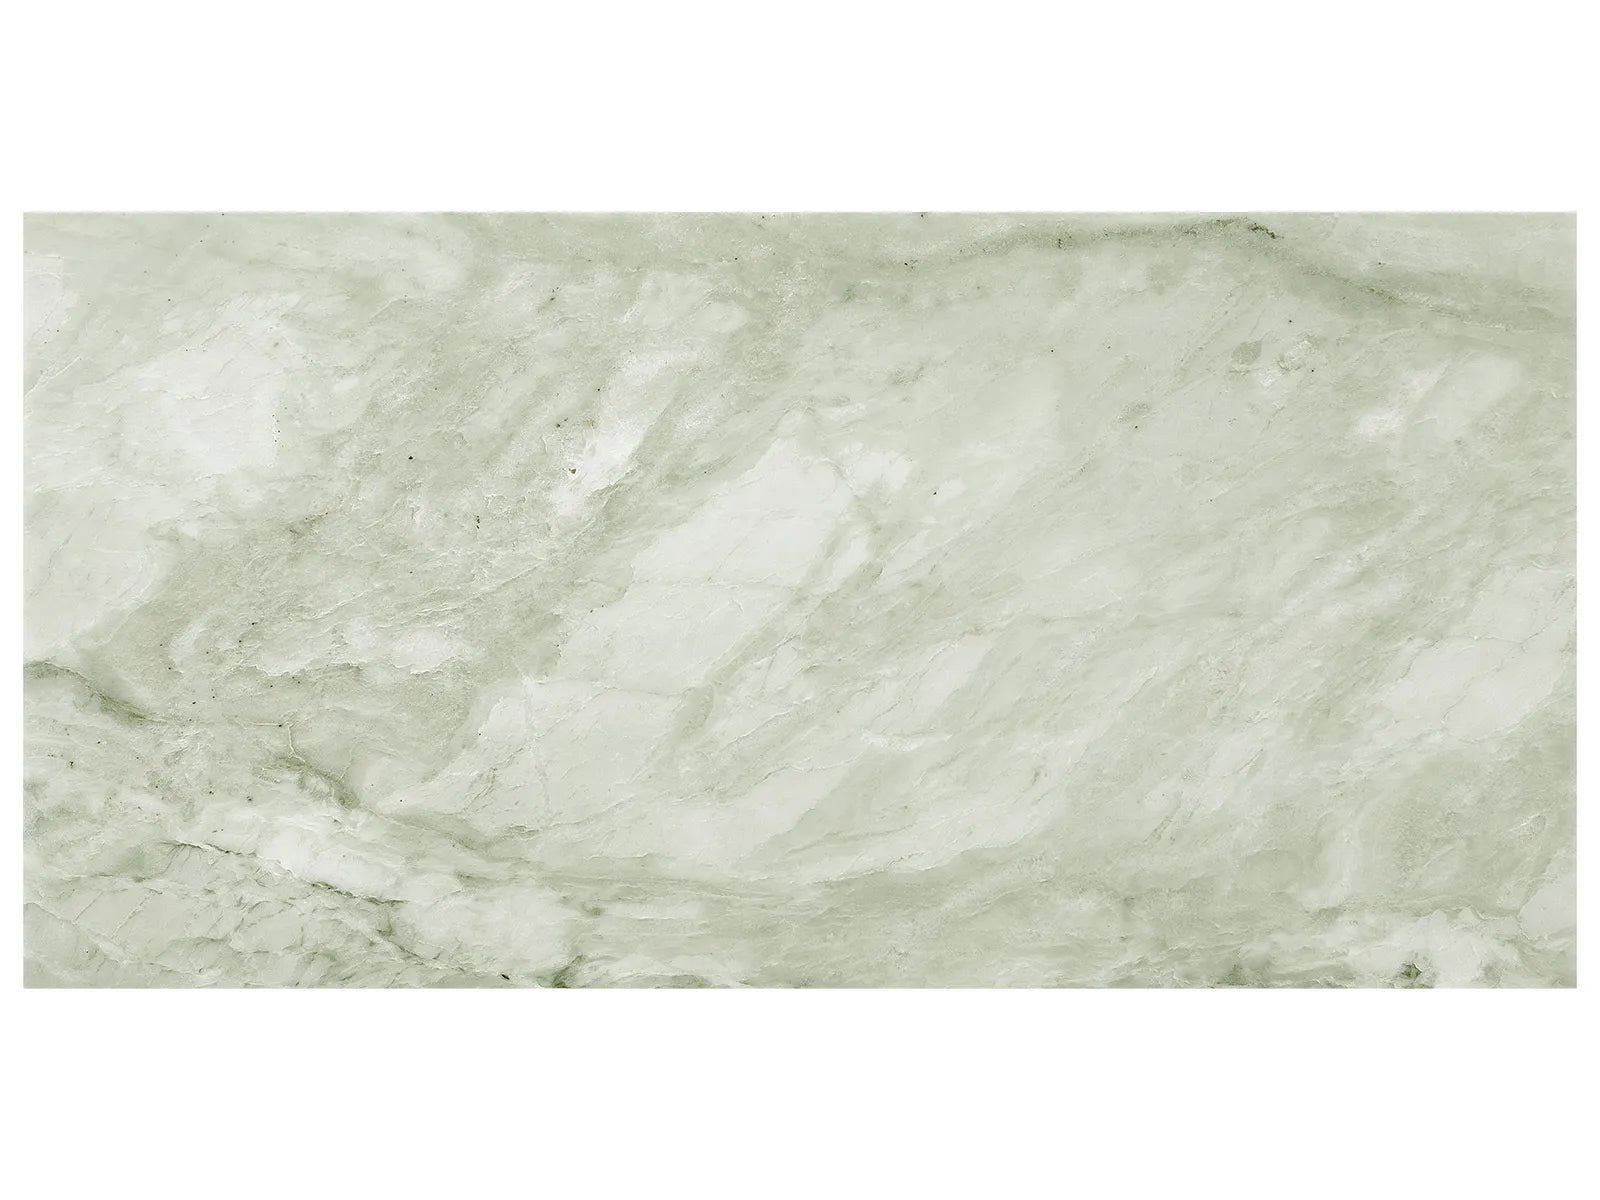 MOSCATO ARGENTO: Marble Field Tile (24¹⁄₁₆"X12¹⁄₁₆"X⅜" | Honed)